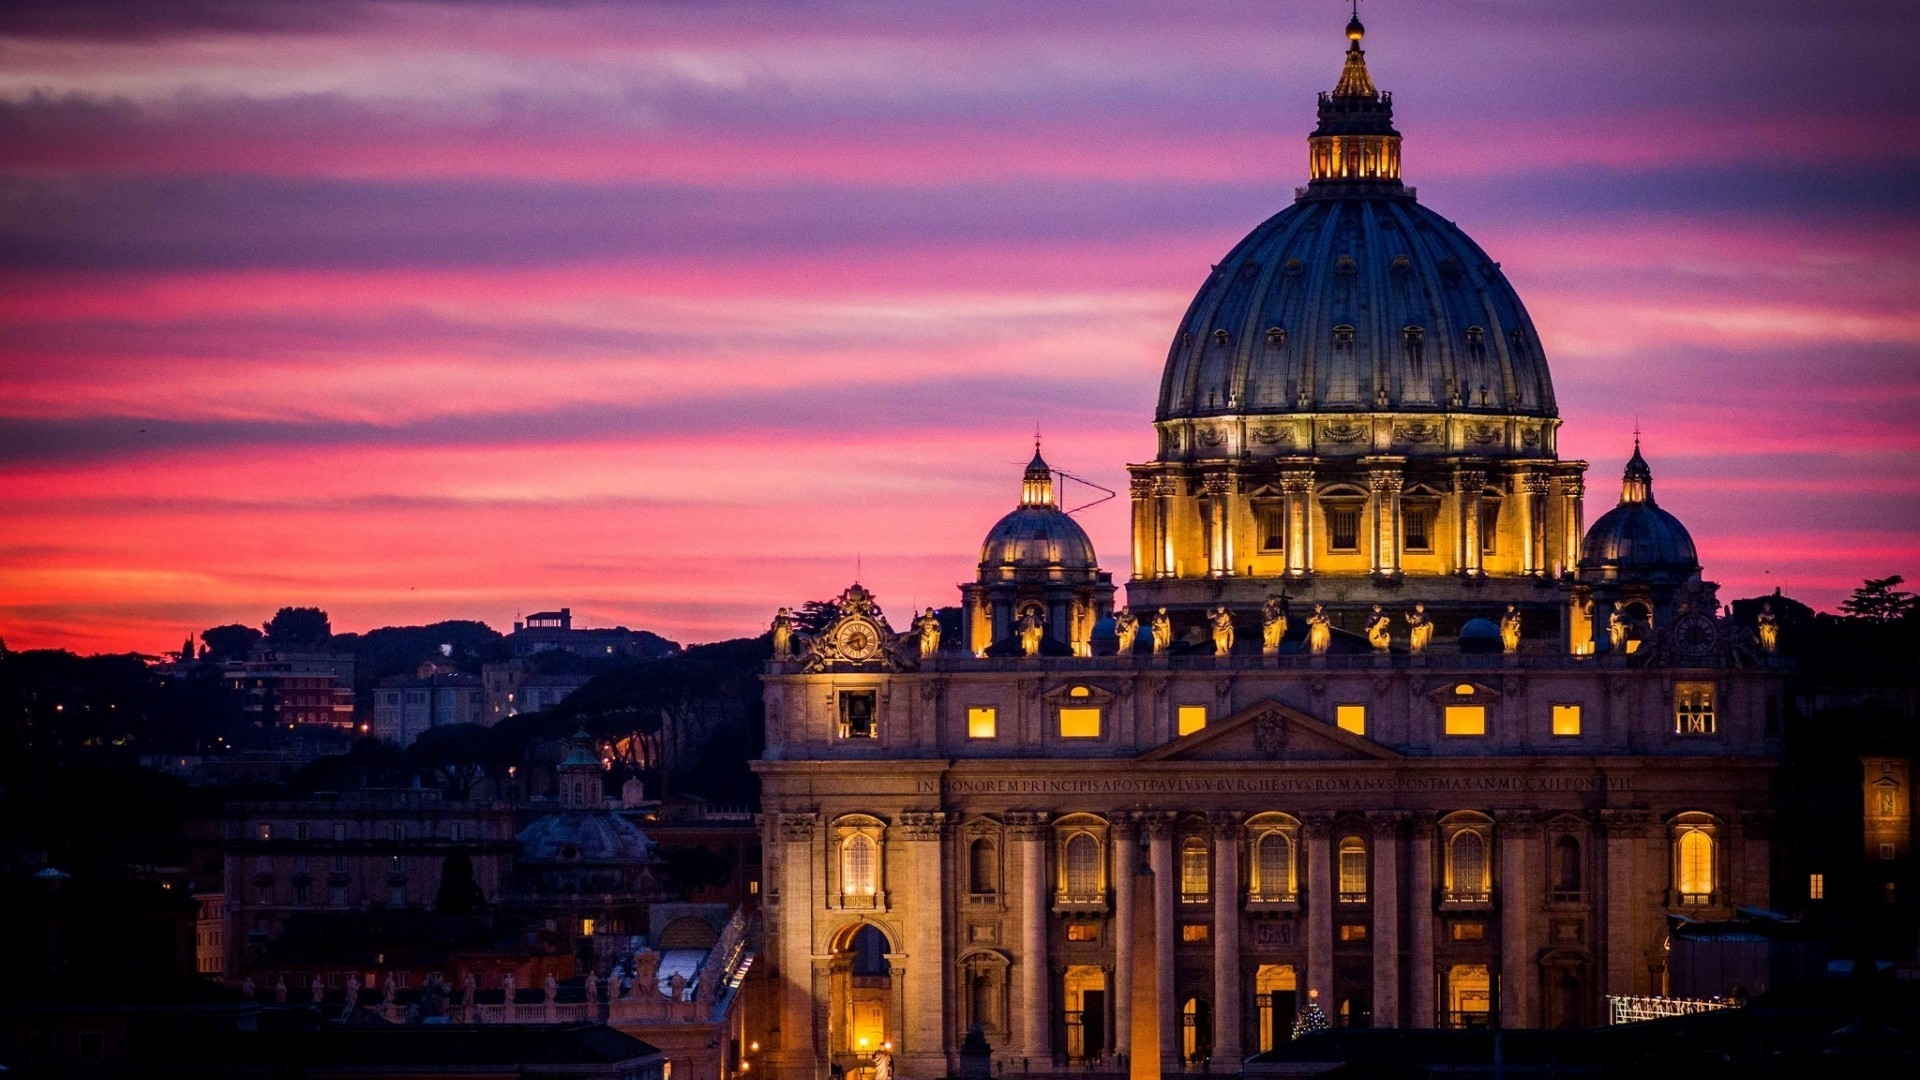 Vatican Night View for 1920 x 1080 HDTV 1080p resolution